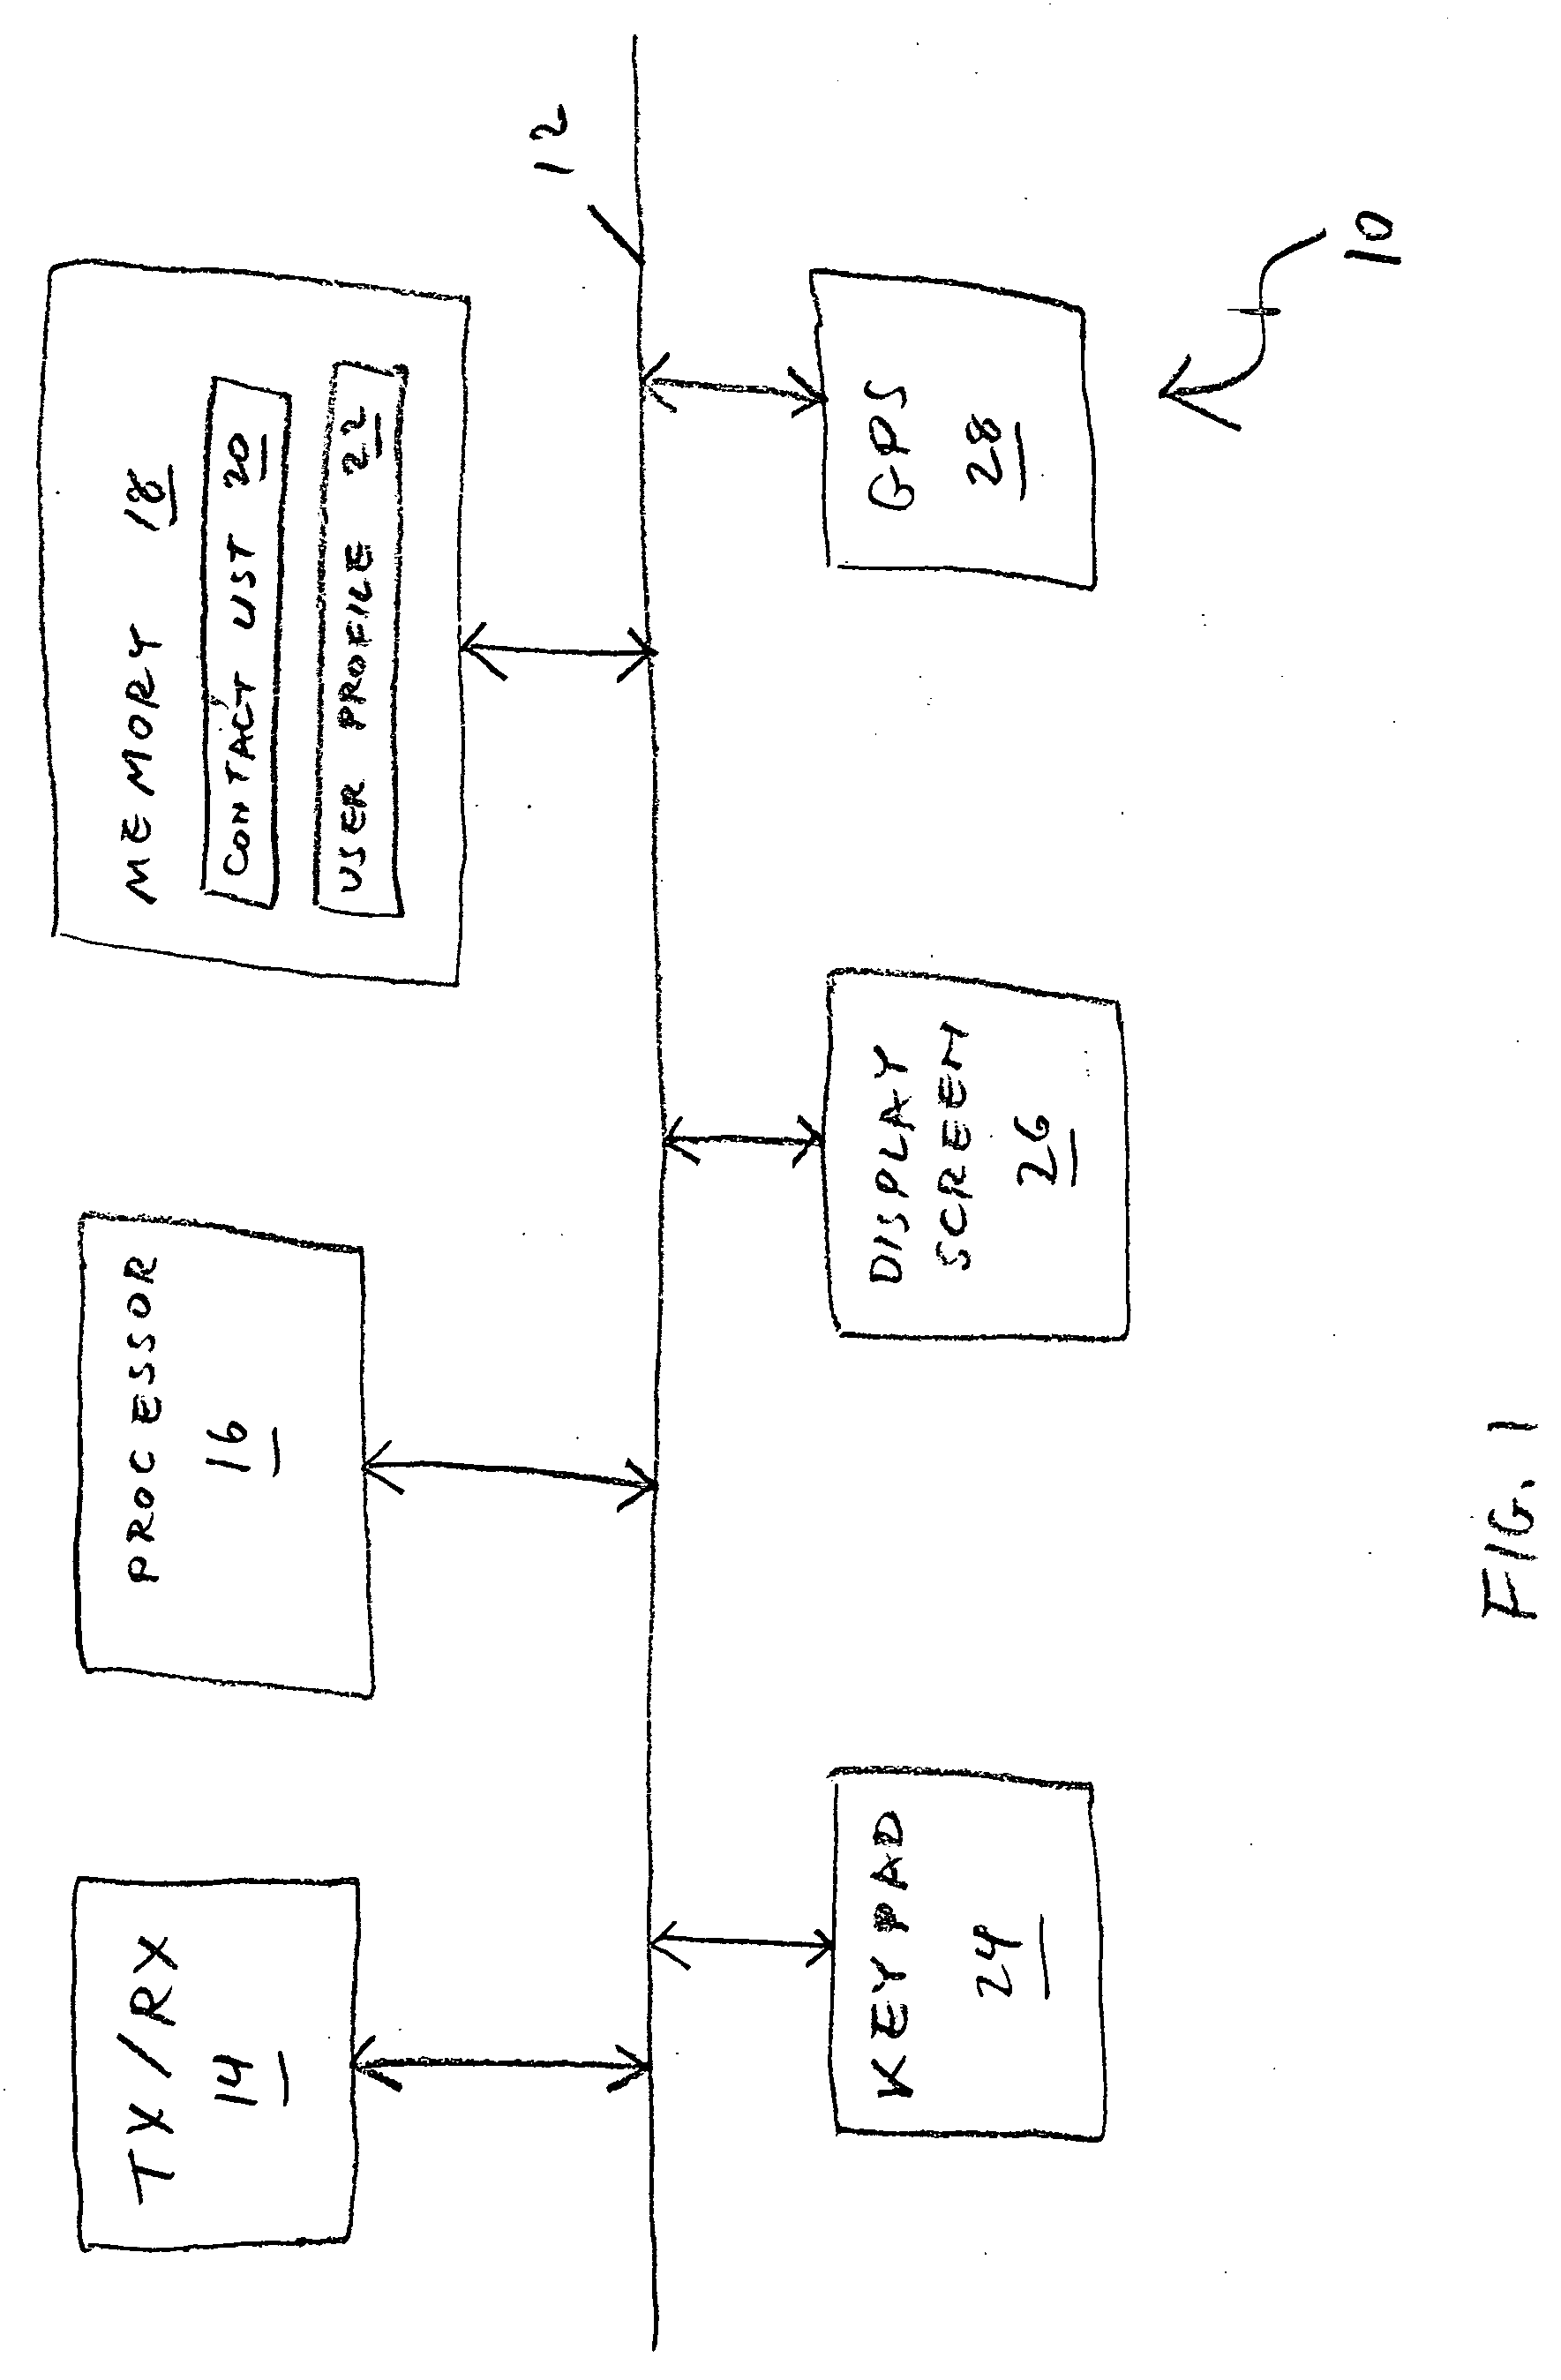 Method and system for selective wireless communication